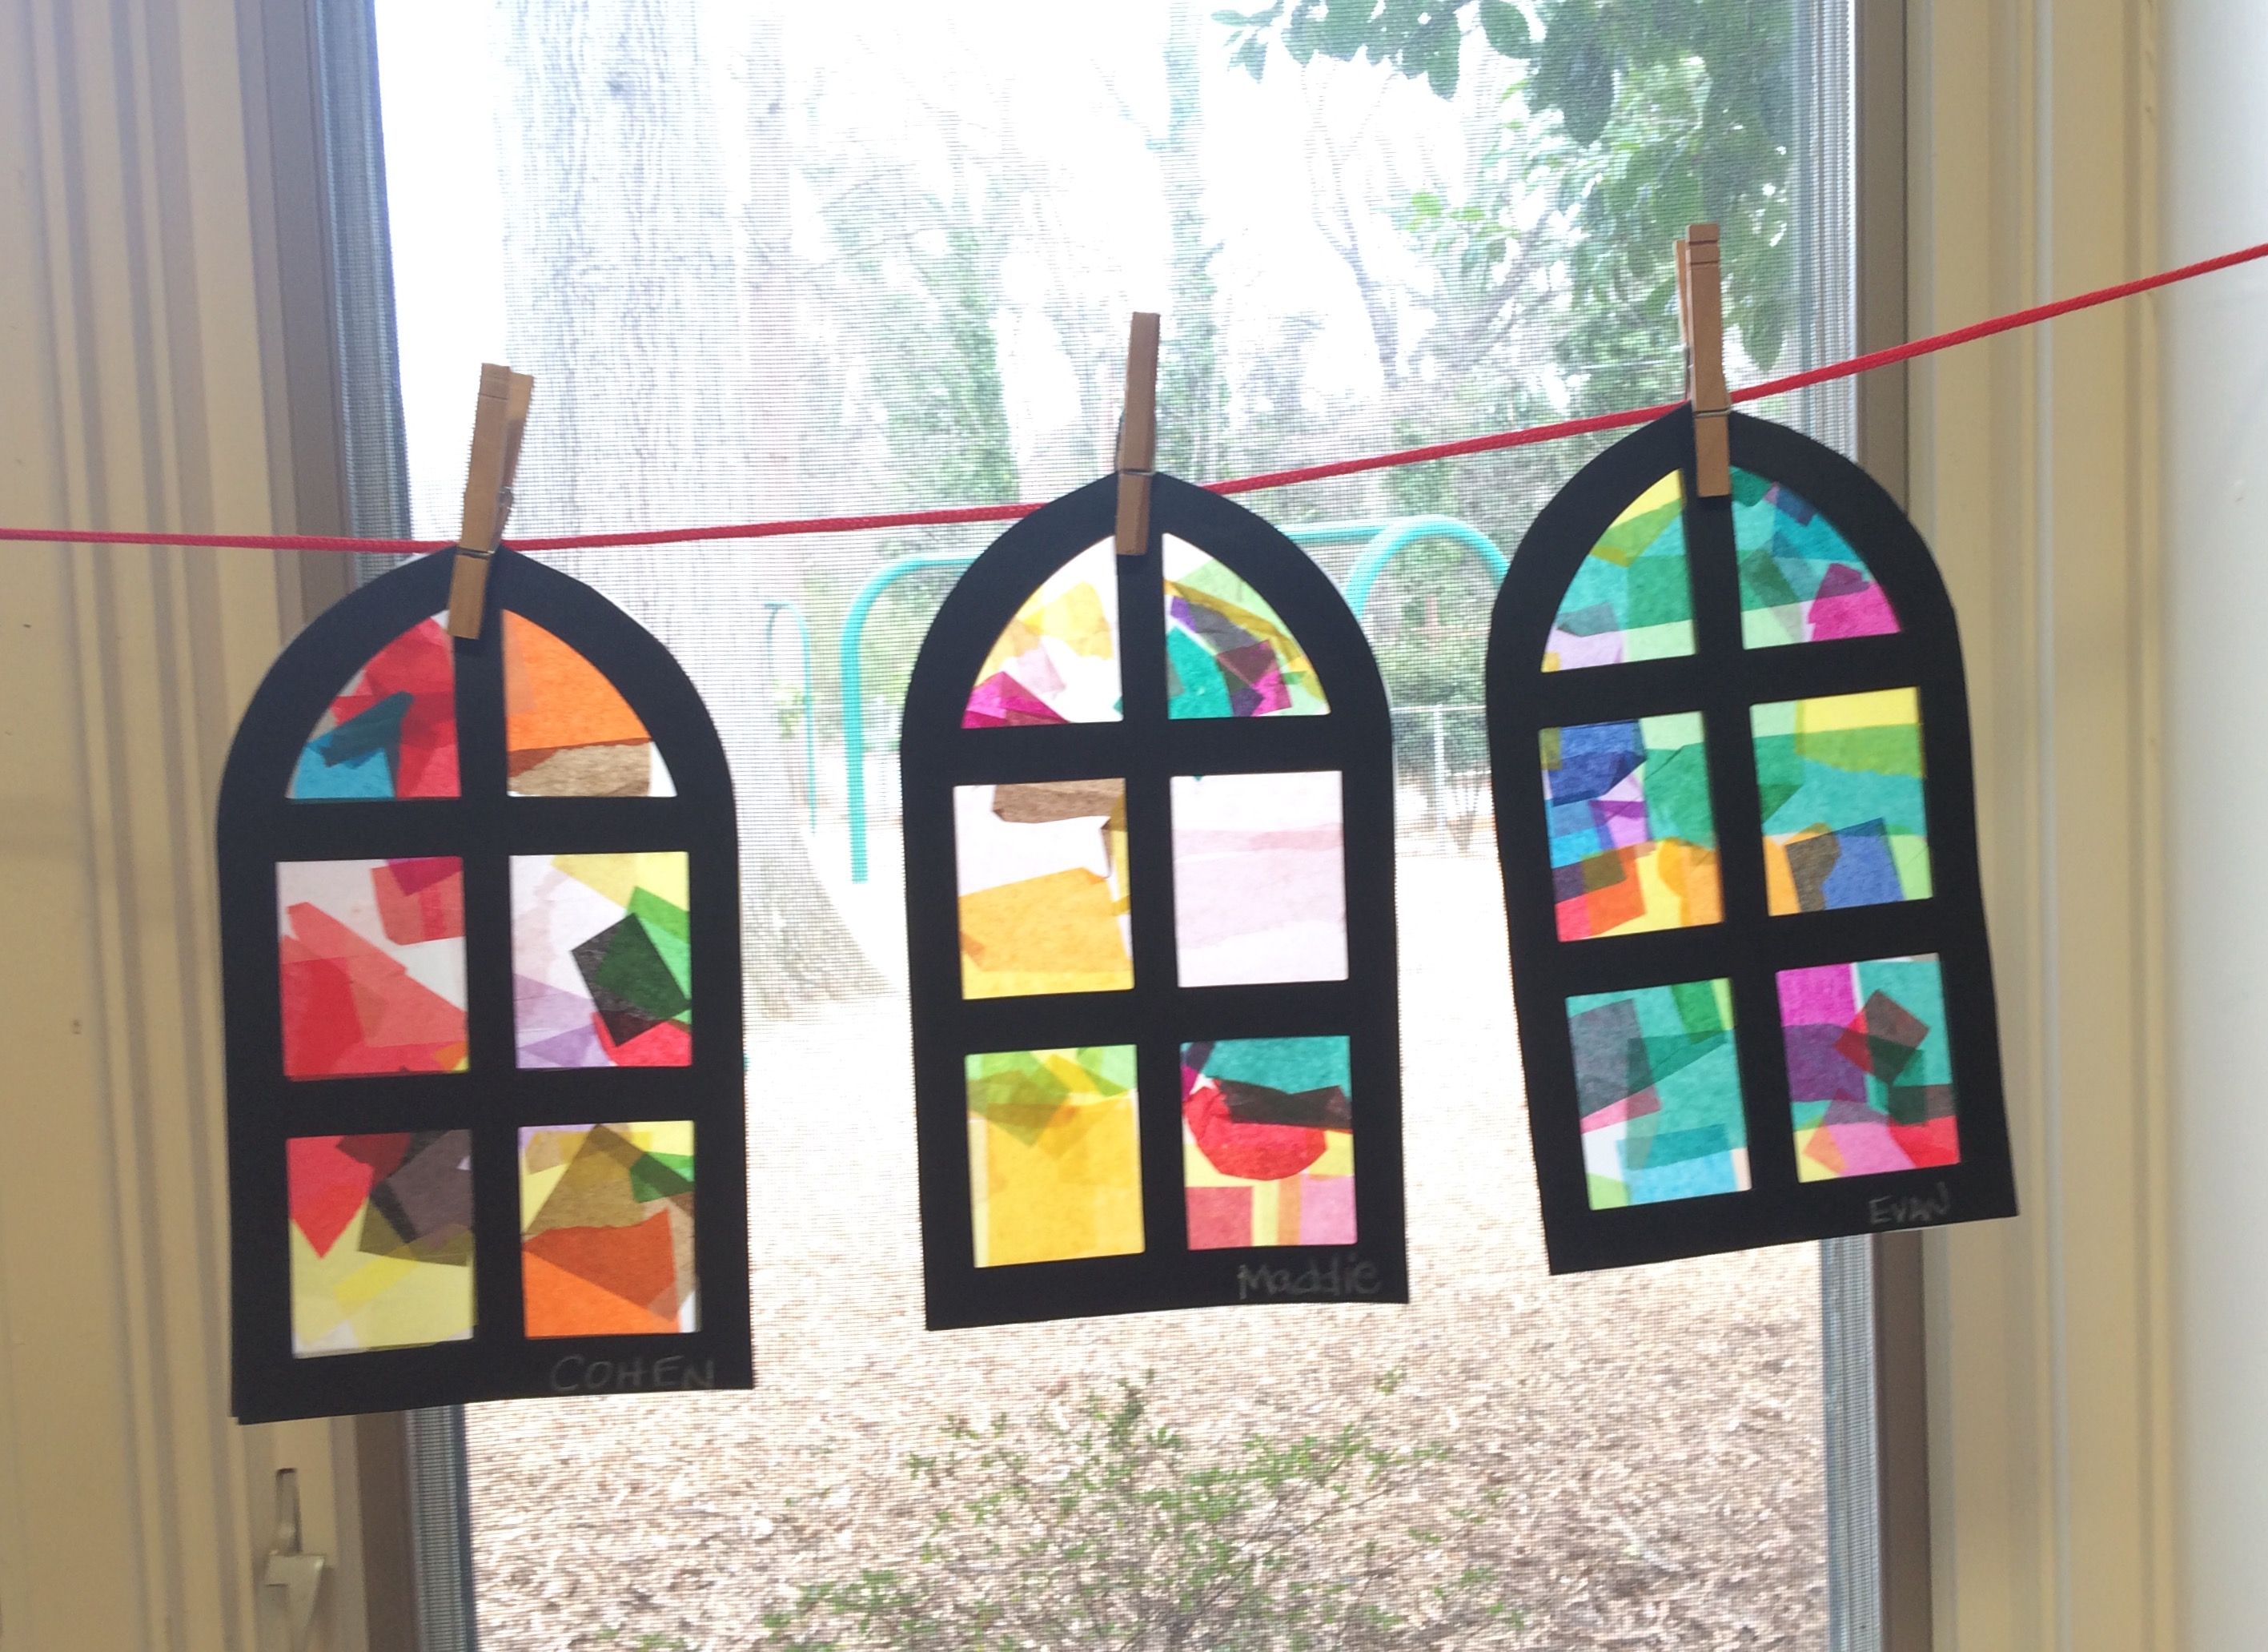 Stain glass church window craft. Used colored tissue paper on sticky ...